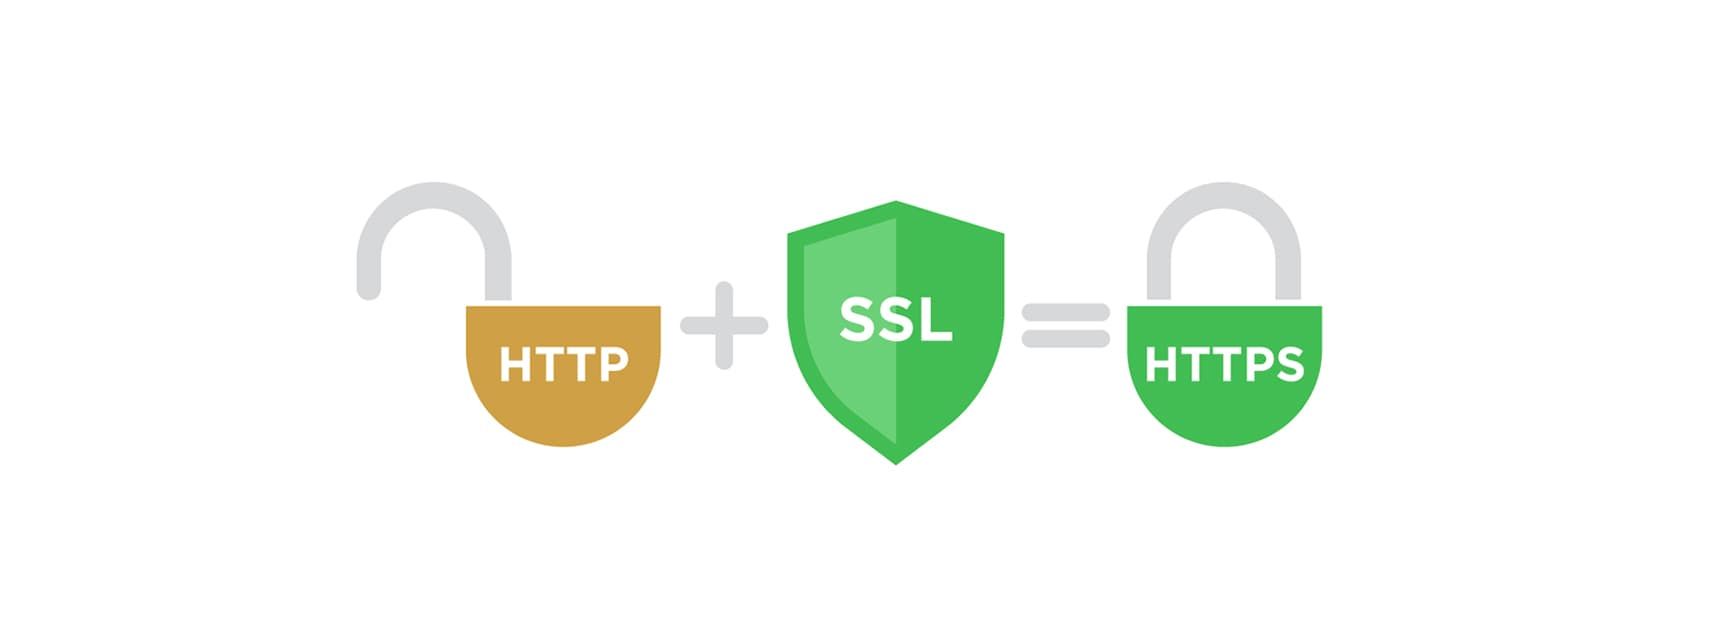 How to set up a secure https connection on your site?